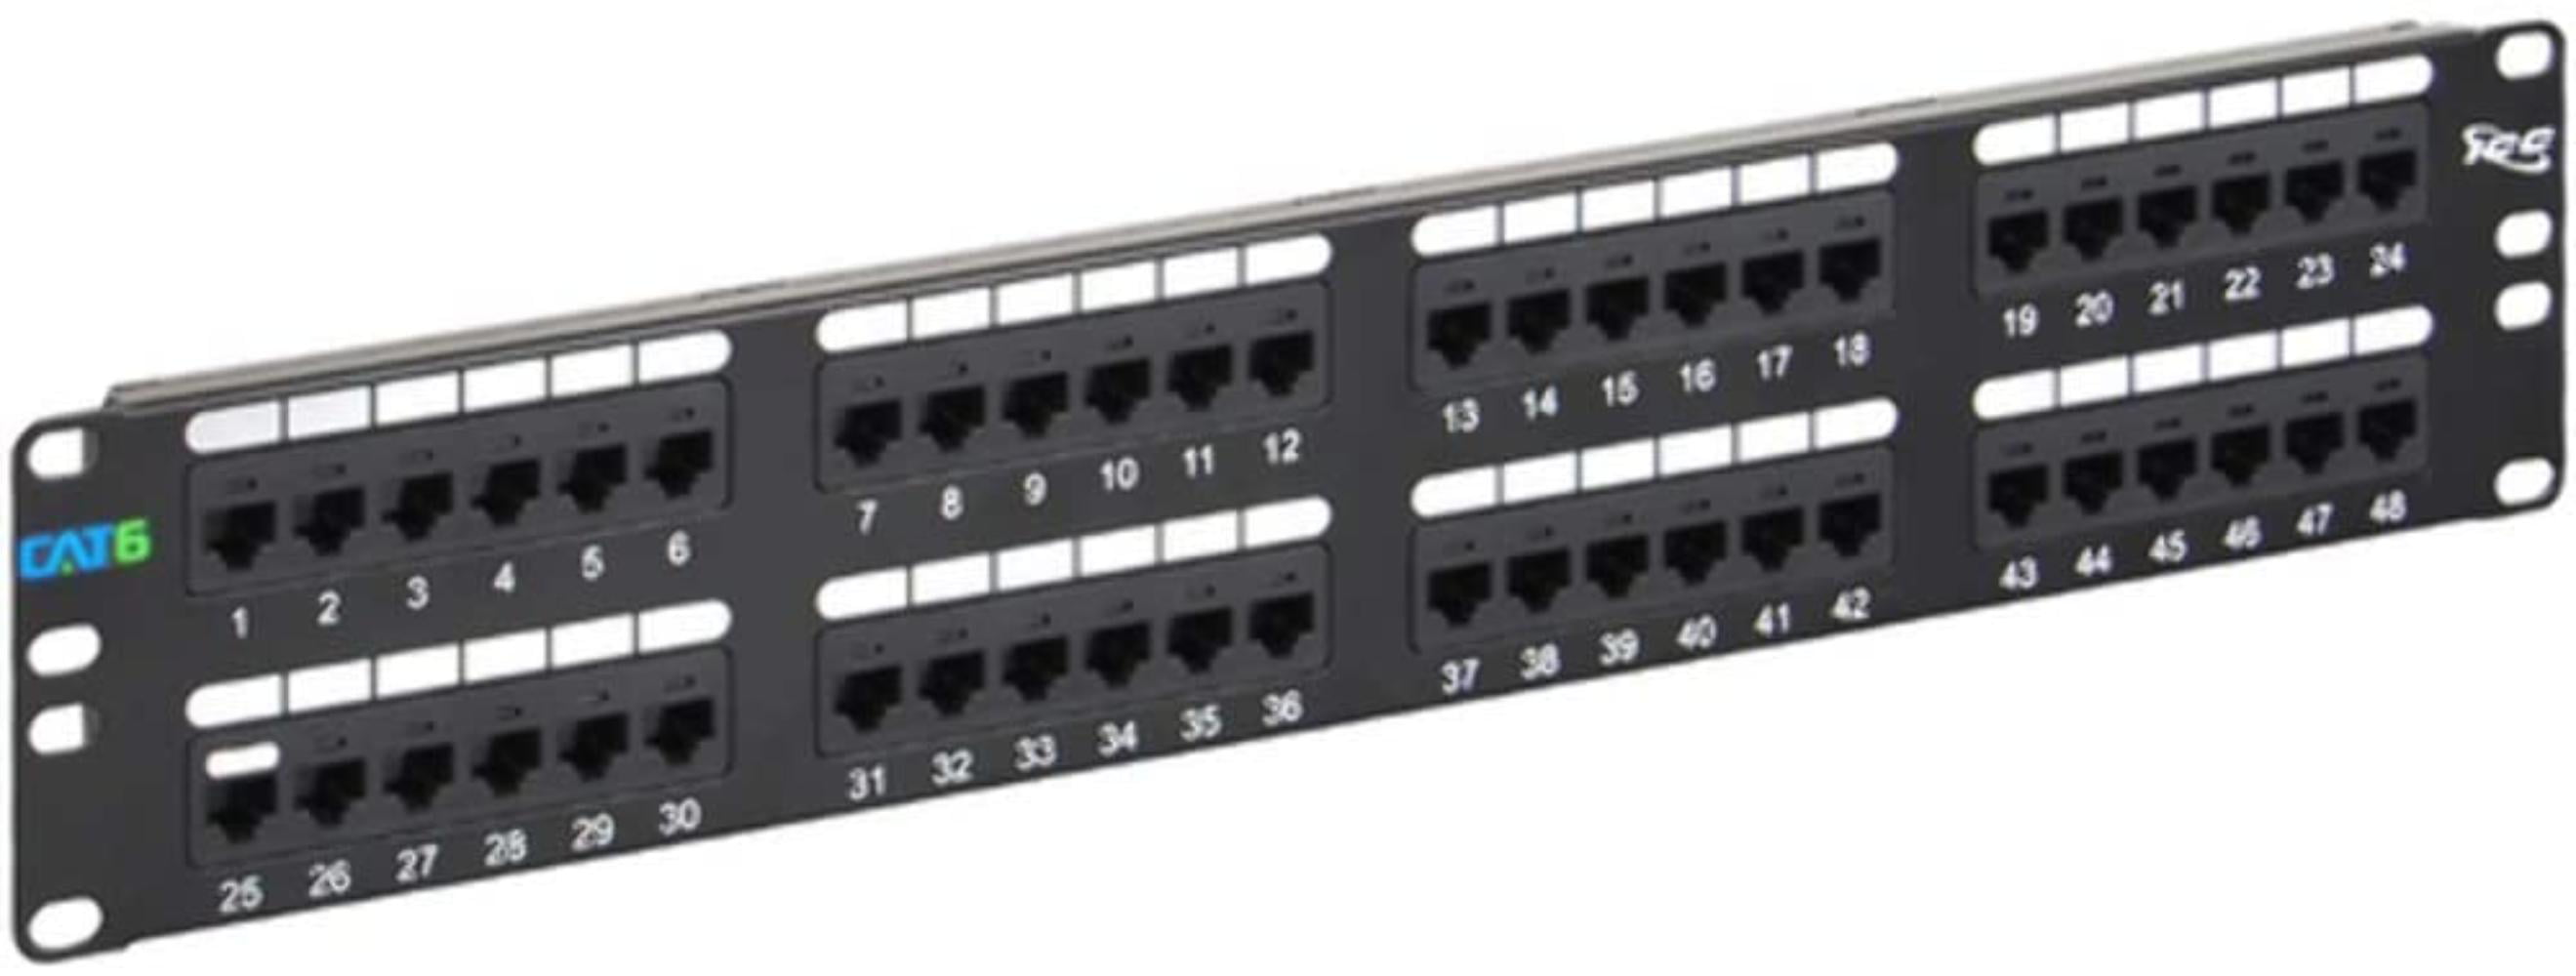 5 Pack Stock-up & $ave TUFF JACKS Cat5e Cat5 48 Port Patch Panel w/FREE SHIP 